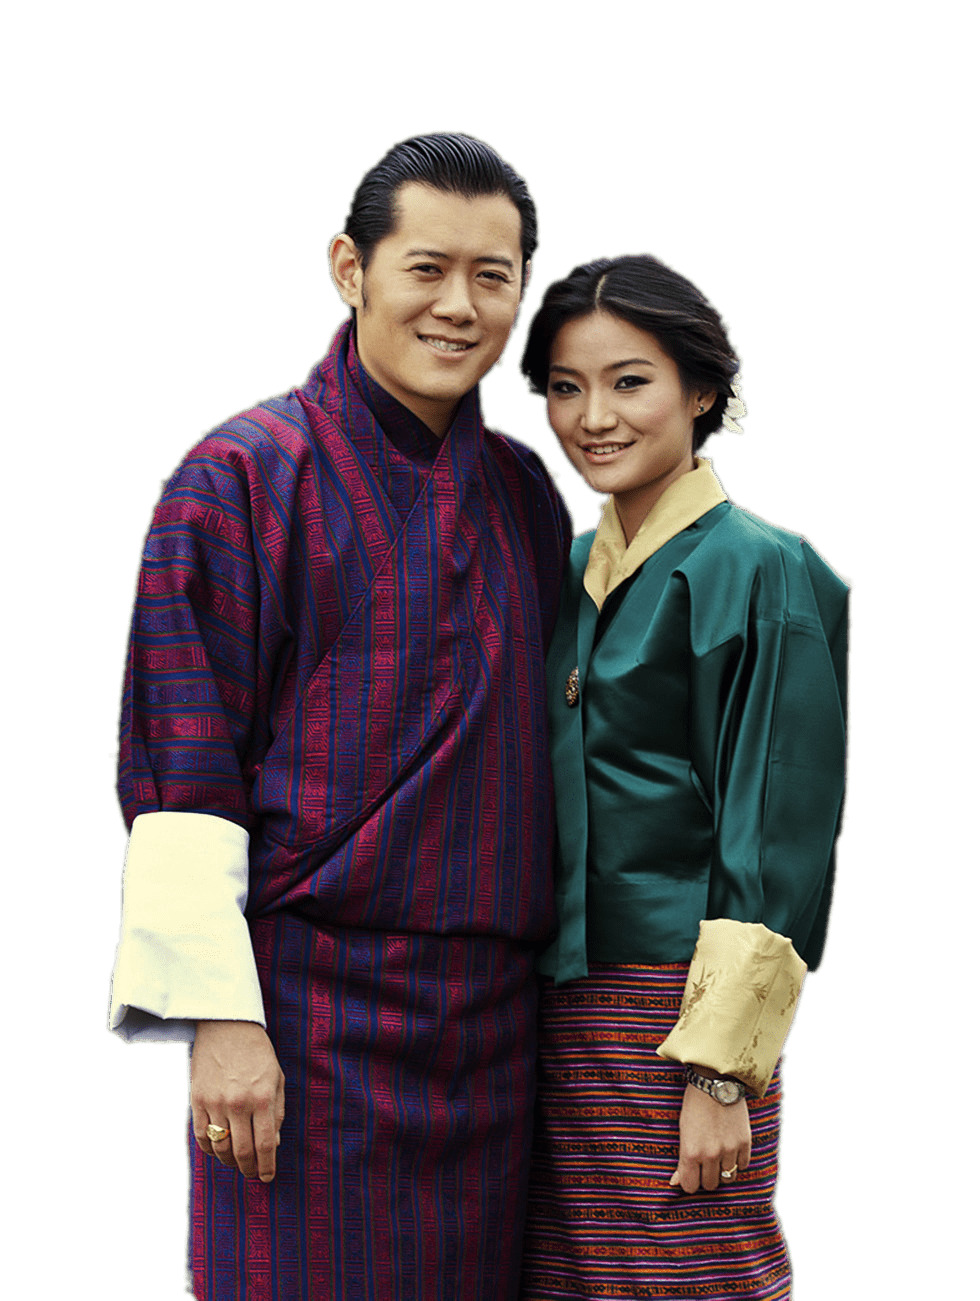 Bhutan King and Queen icons